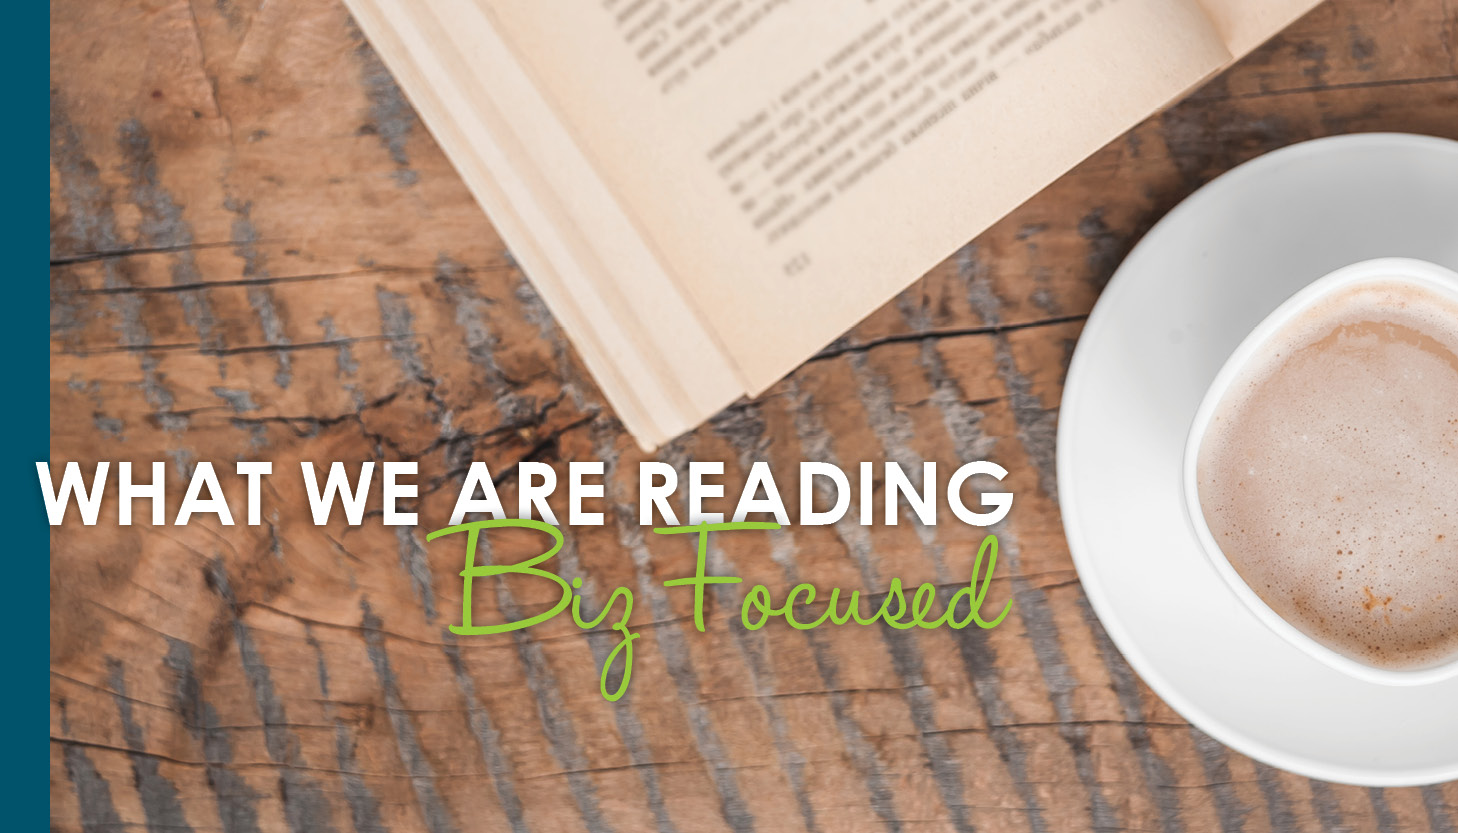 A cup of coffee and a book sit on a desk next to white font reading, "What we are reading: Biz Focused."